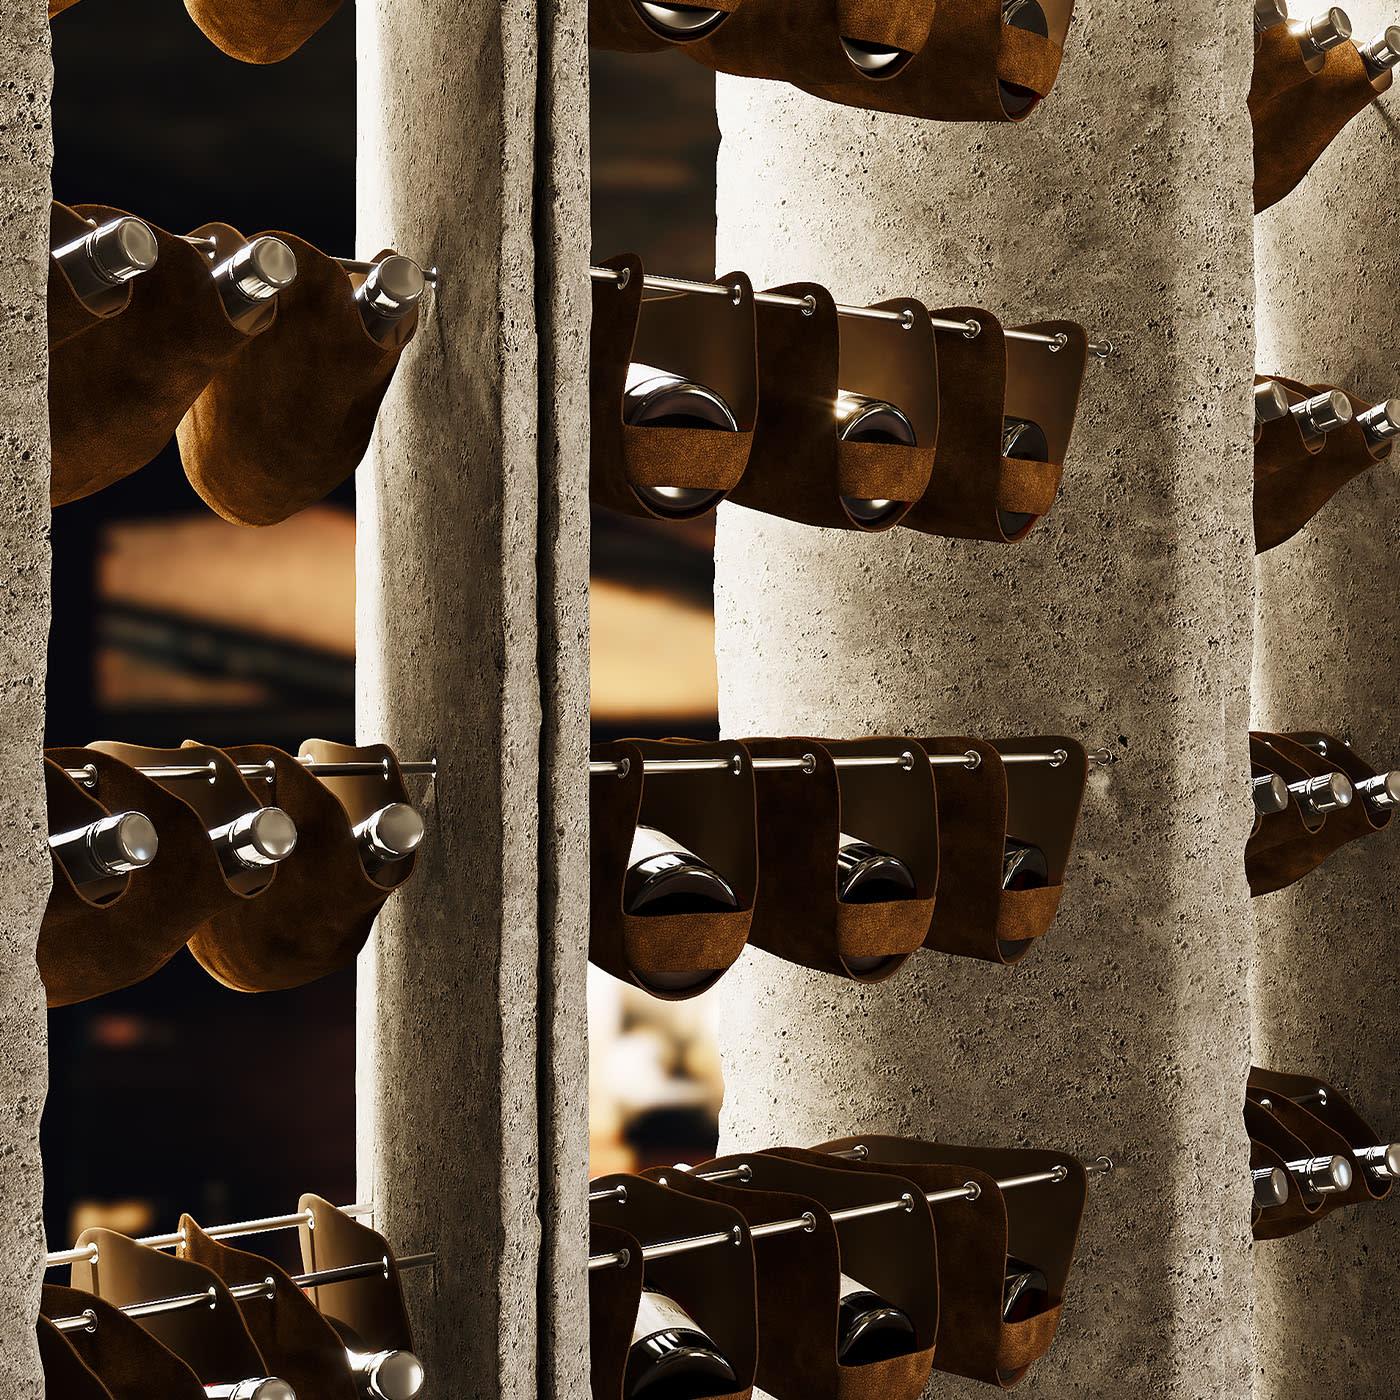 At once rustic and sophisticated, this wine cabinet is a precious design conceived for paying homage to Trentino Alto Adige. The rich wine tradition of the territory boasts merges with the clever use of local stone slabs for assembling its